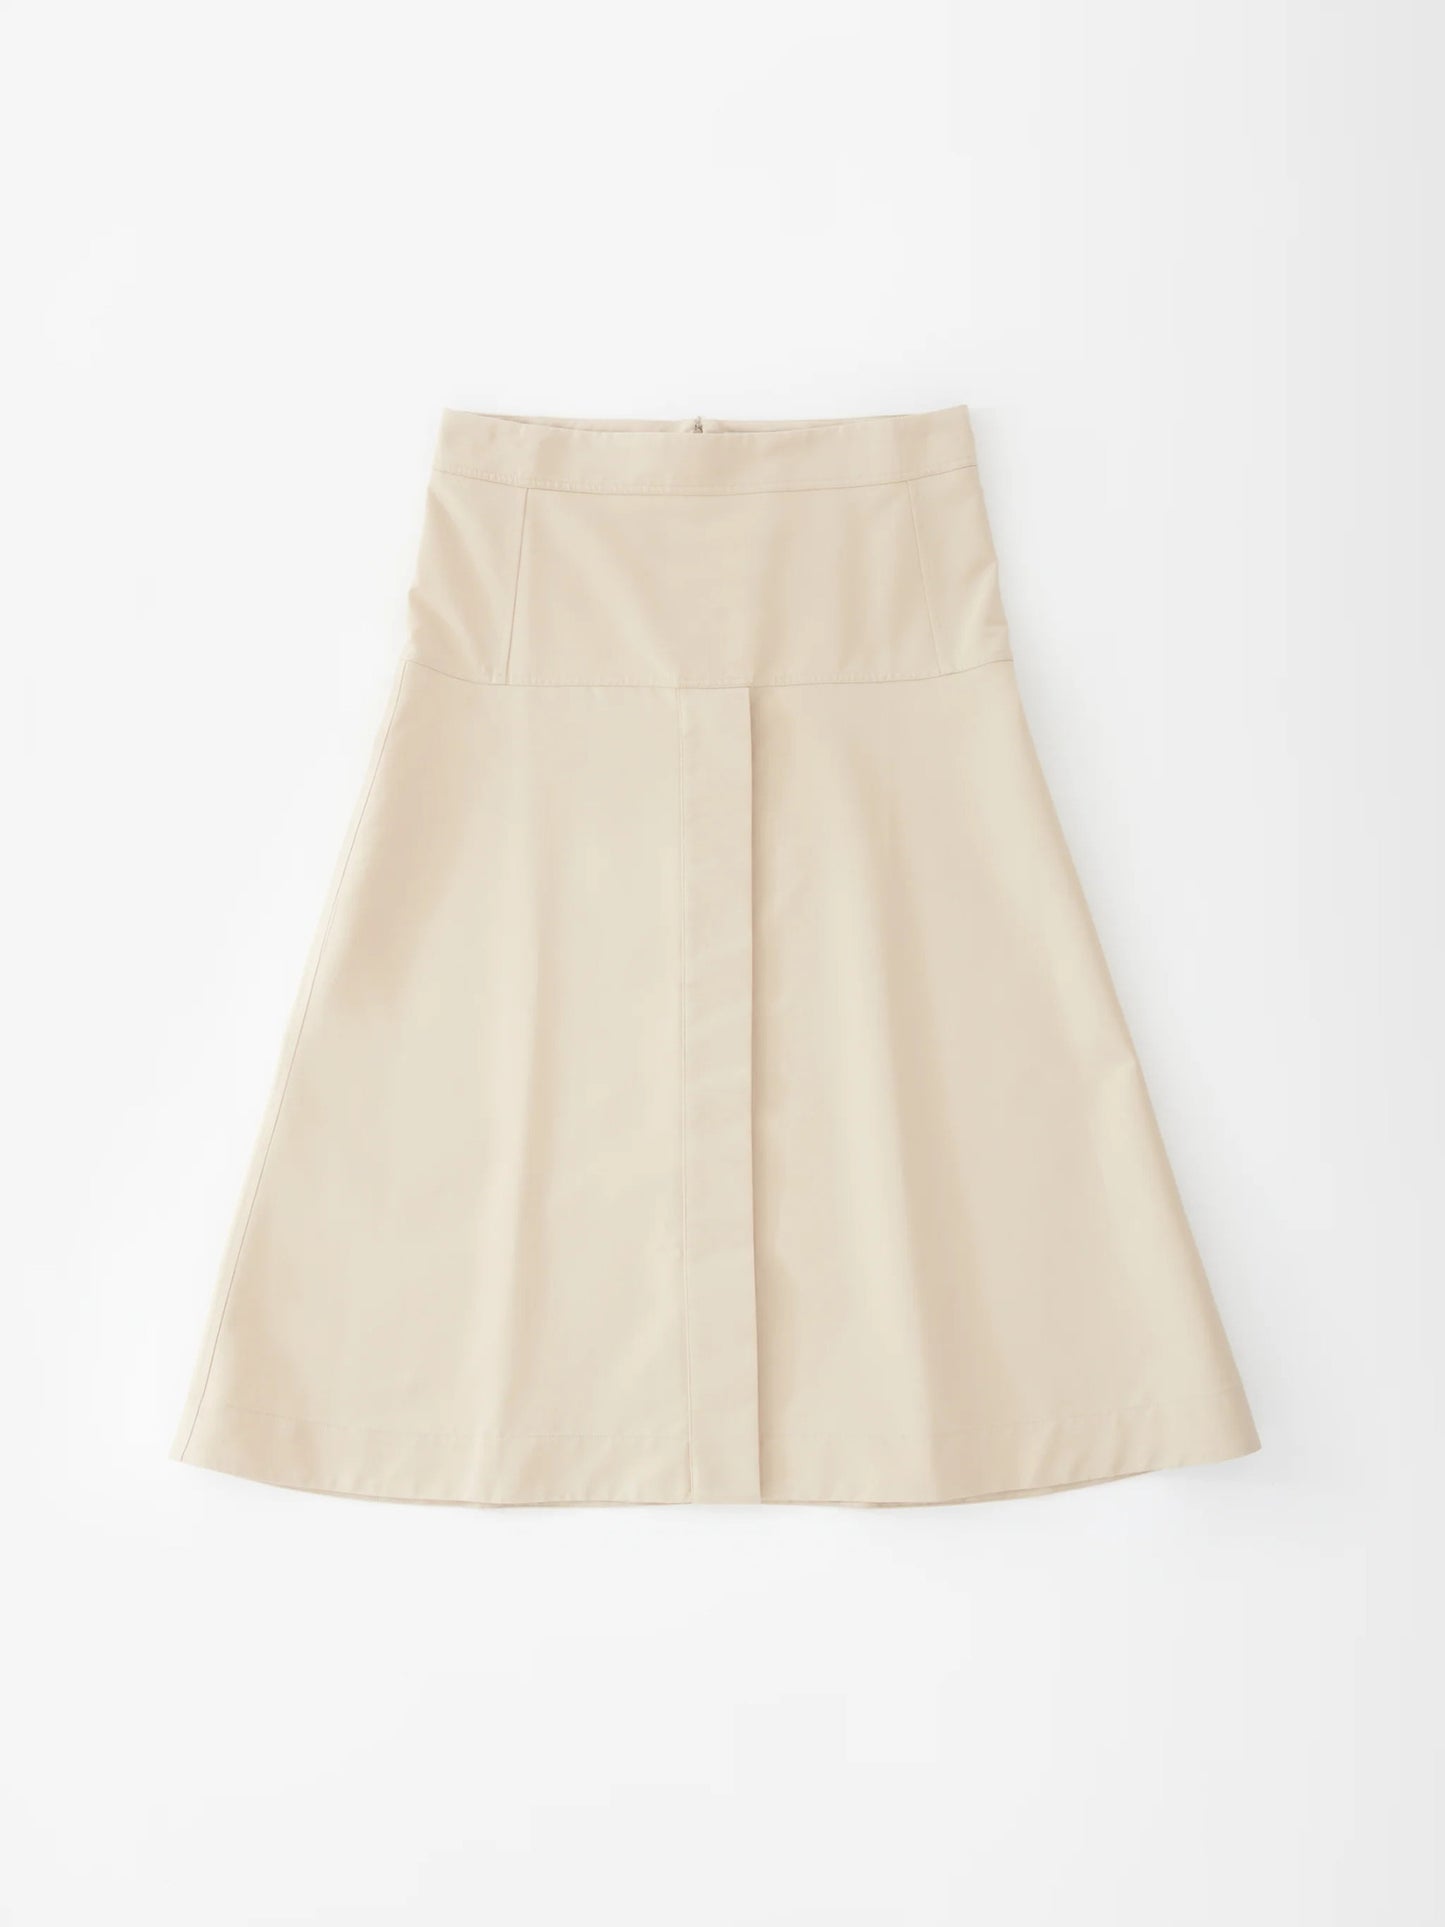 SKIRTS - PANELLED SKIRT WITH FRONT VENT